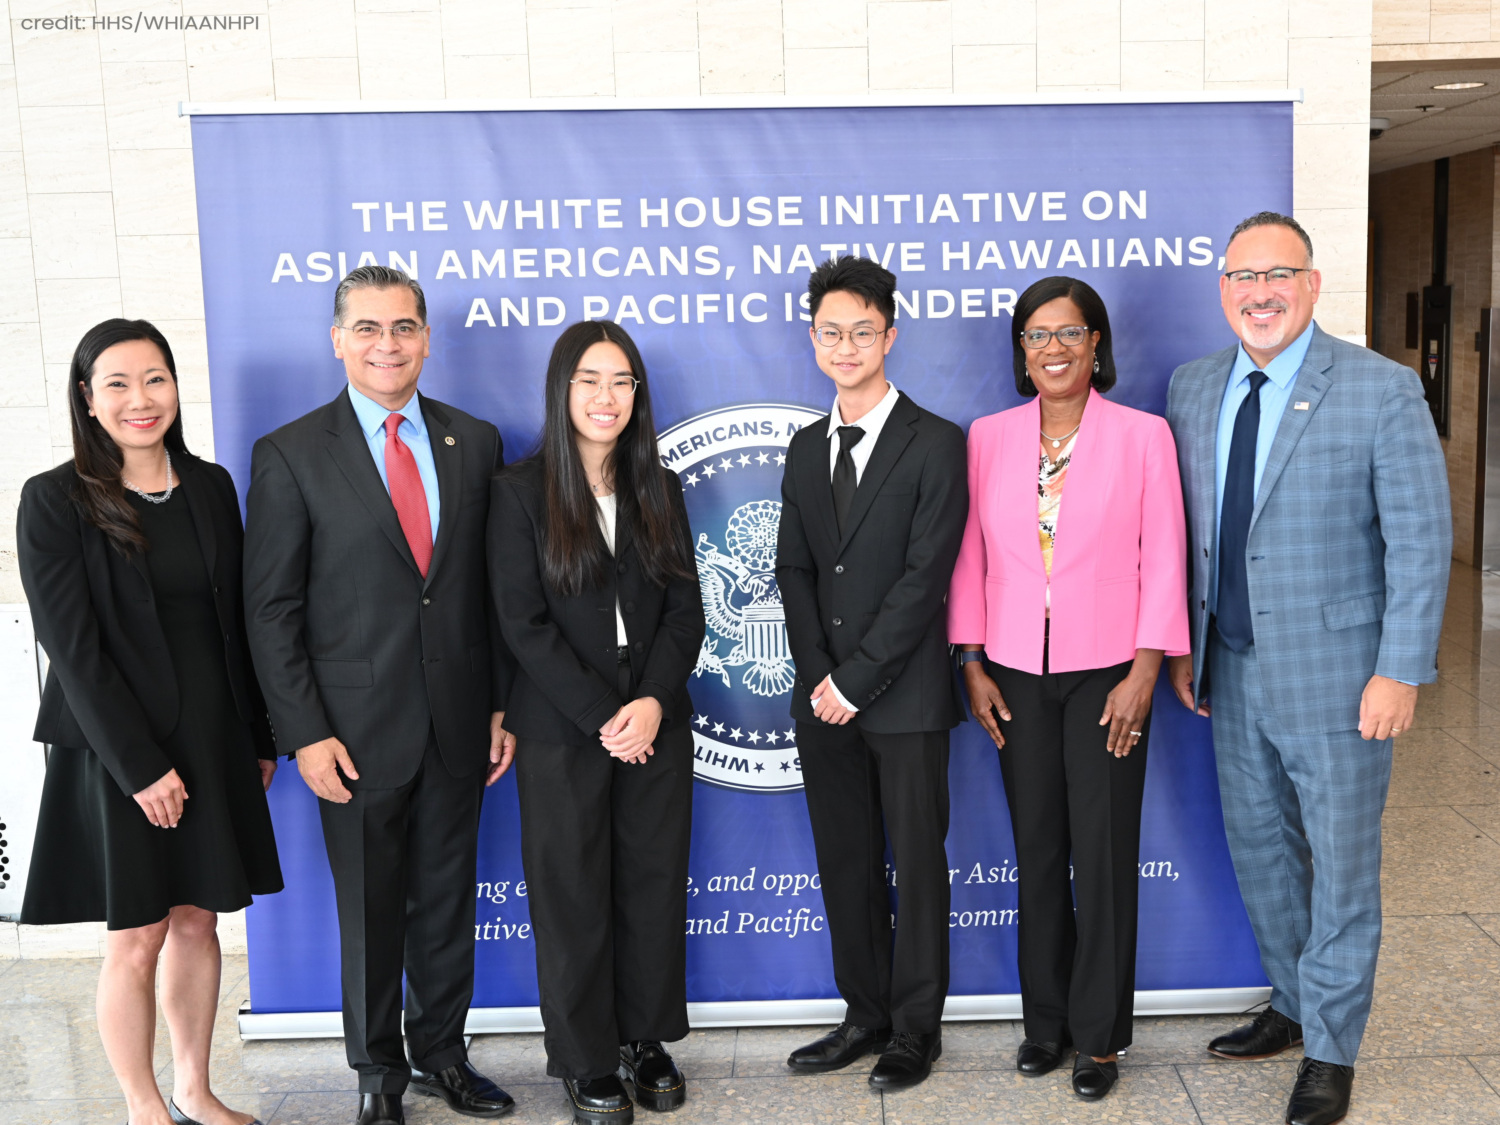 White House Summit on Asian American, Native Hawaiian and Pacific Islander Mental Health with Lotus Project youth advocates and White House administration staff